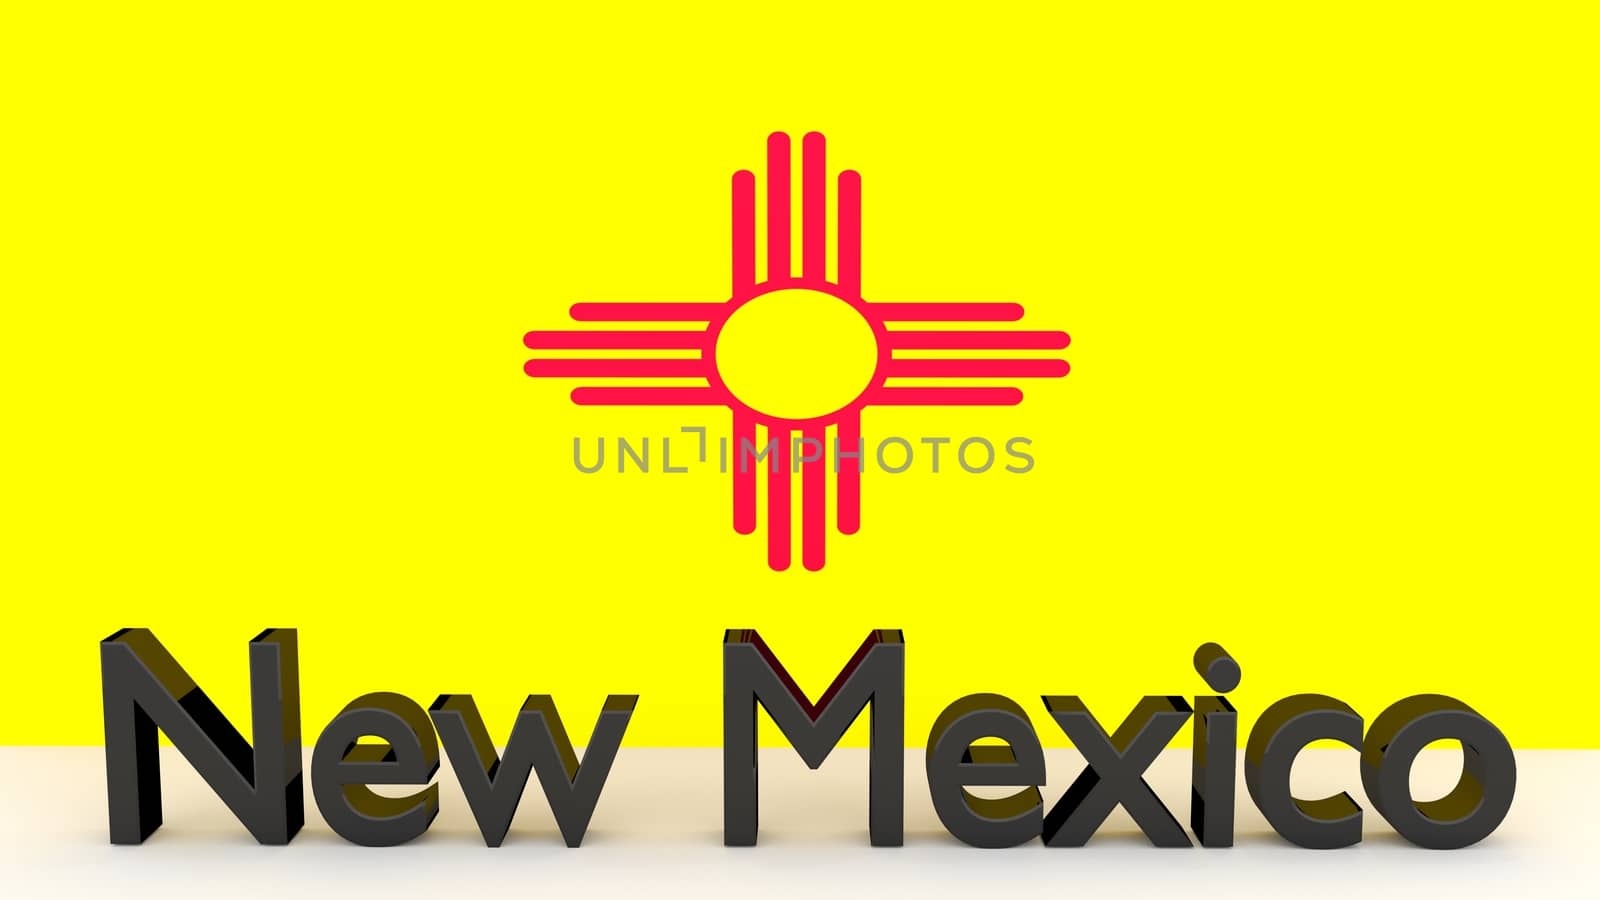 US state New Mexico, metal name in front of flag by MarkDw